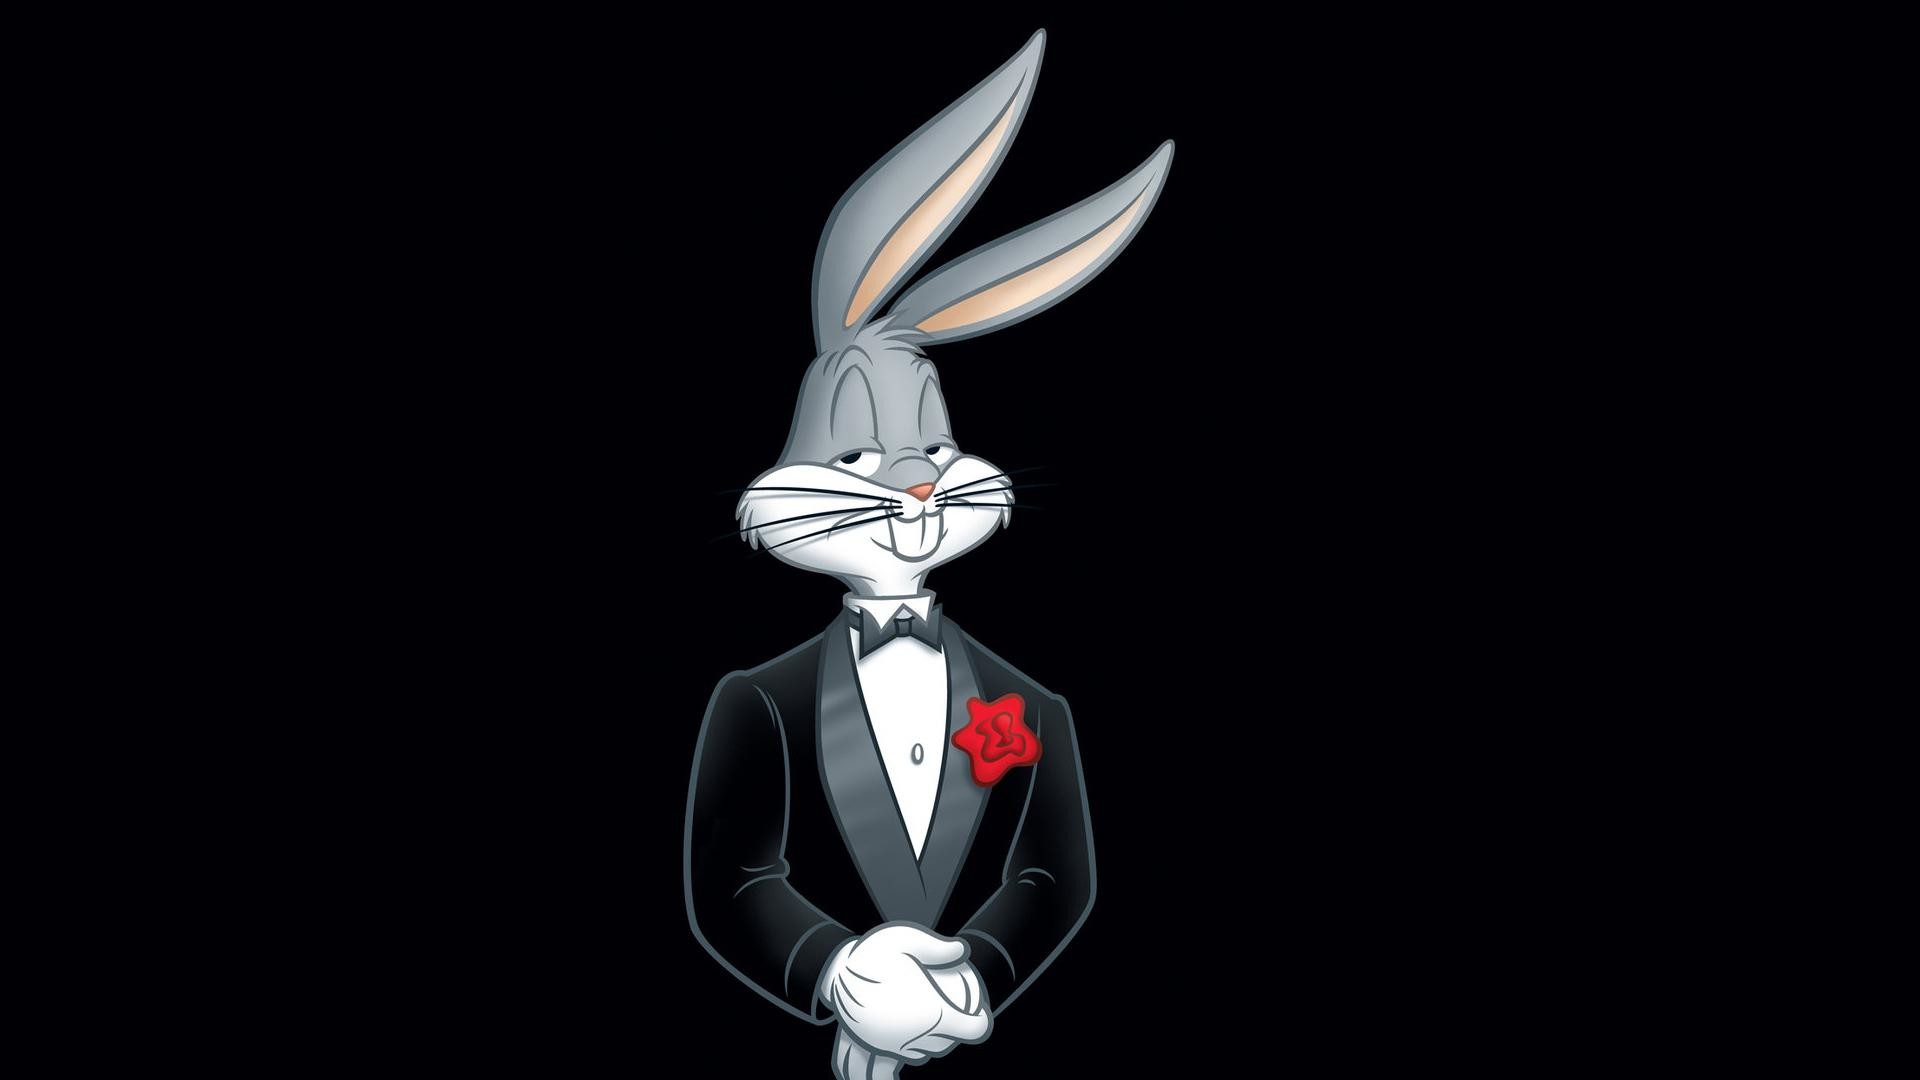 1920x1080 wallpaper.wiki-Bugs-Bunny-Wallpapers-PIC-WPE0011489